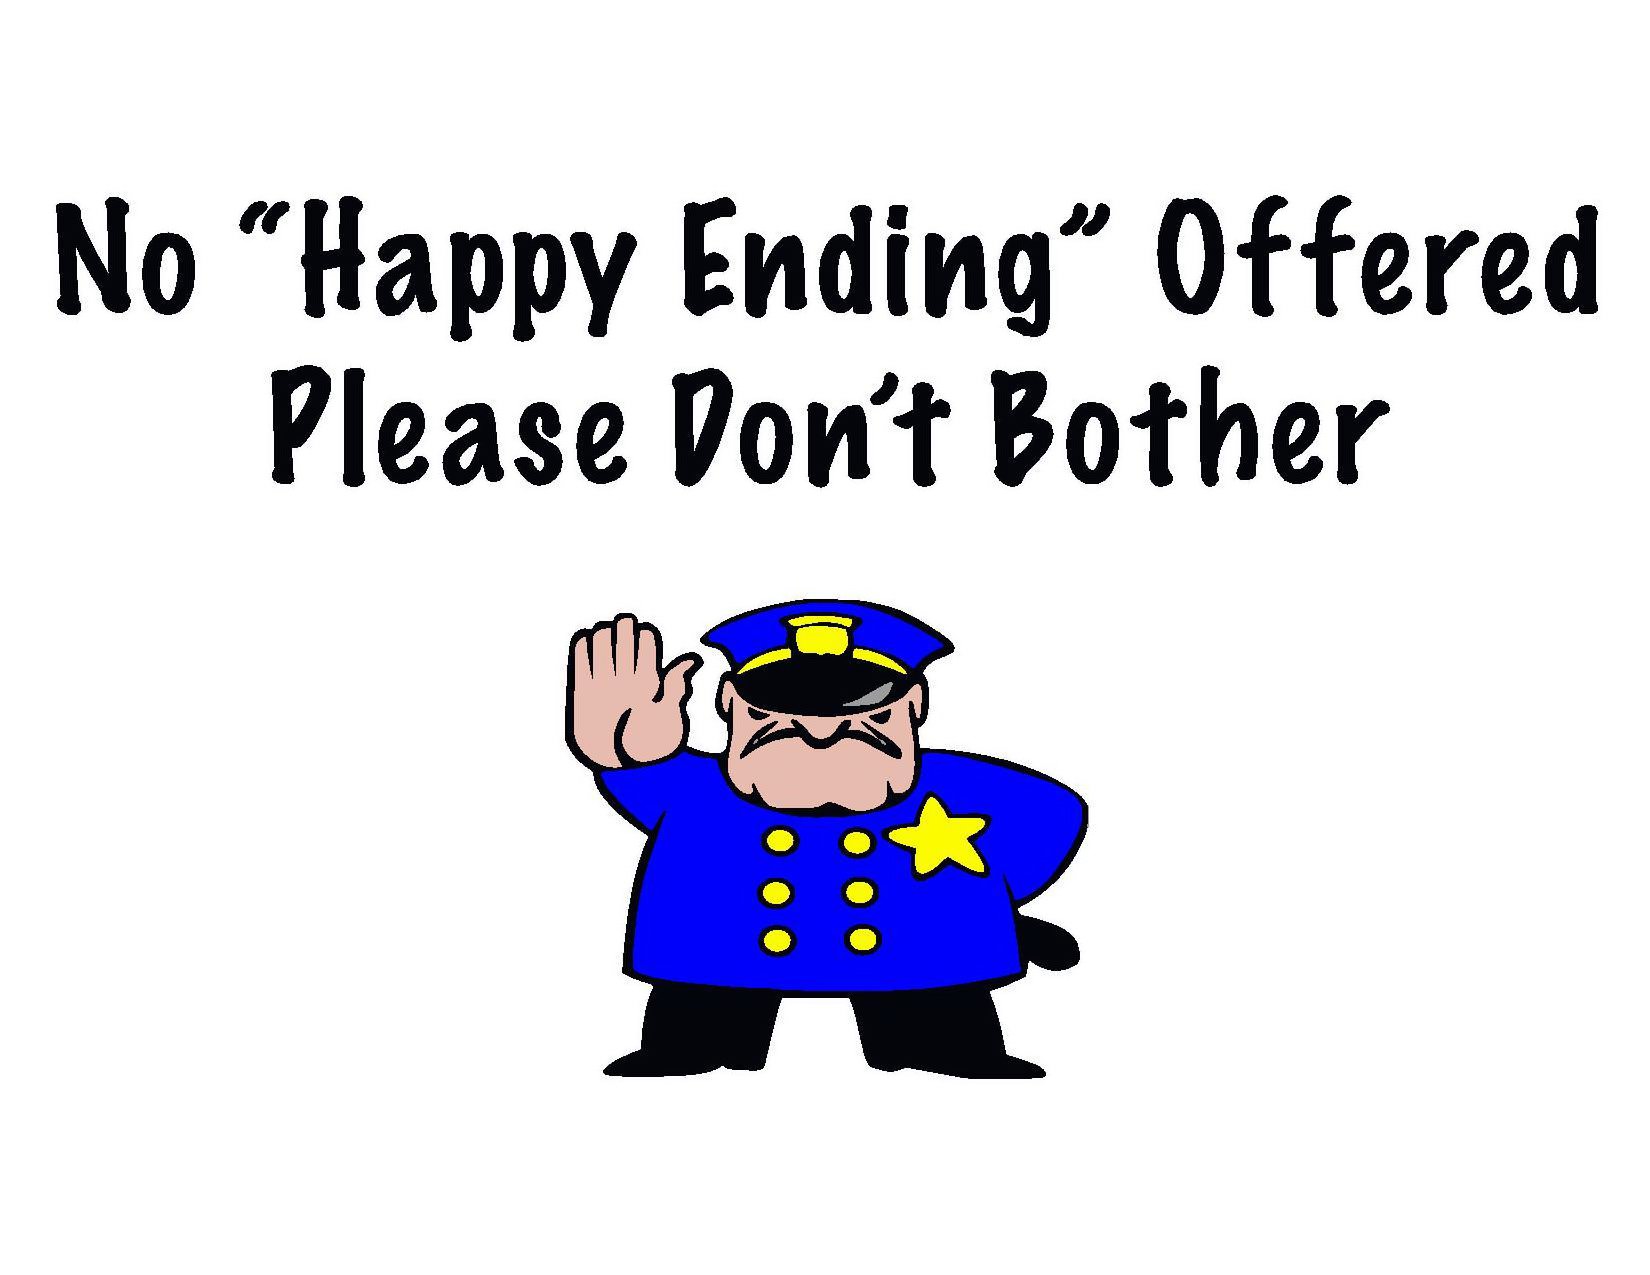  NO "HAPPY ENDING" OFFERED PLEASE DON'T BOTHER